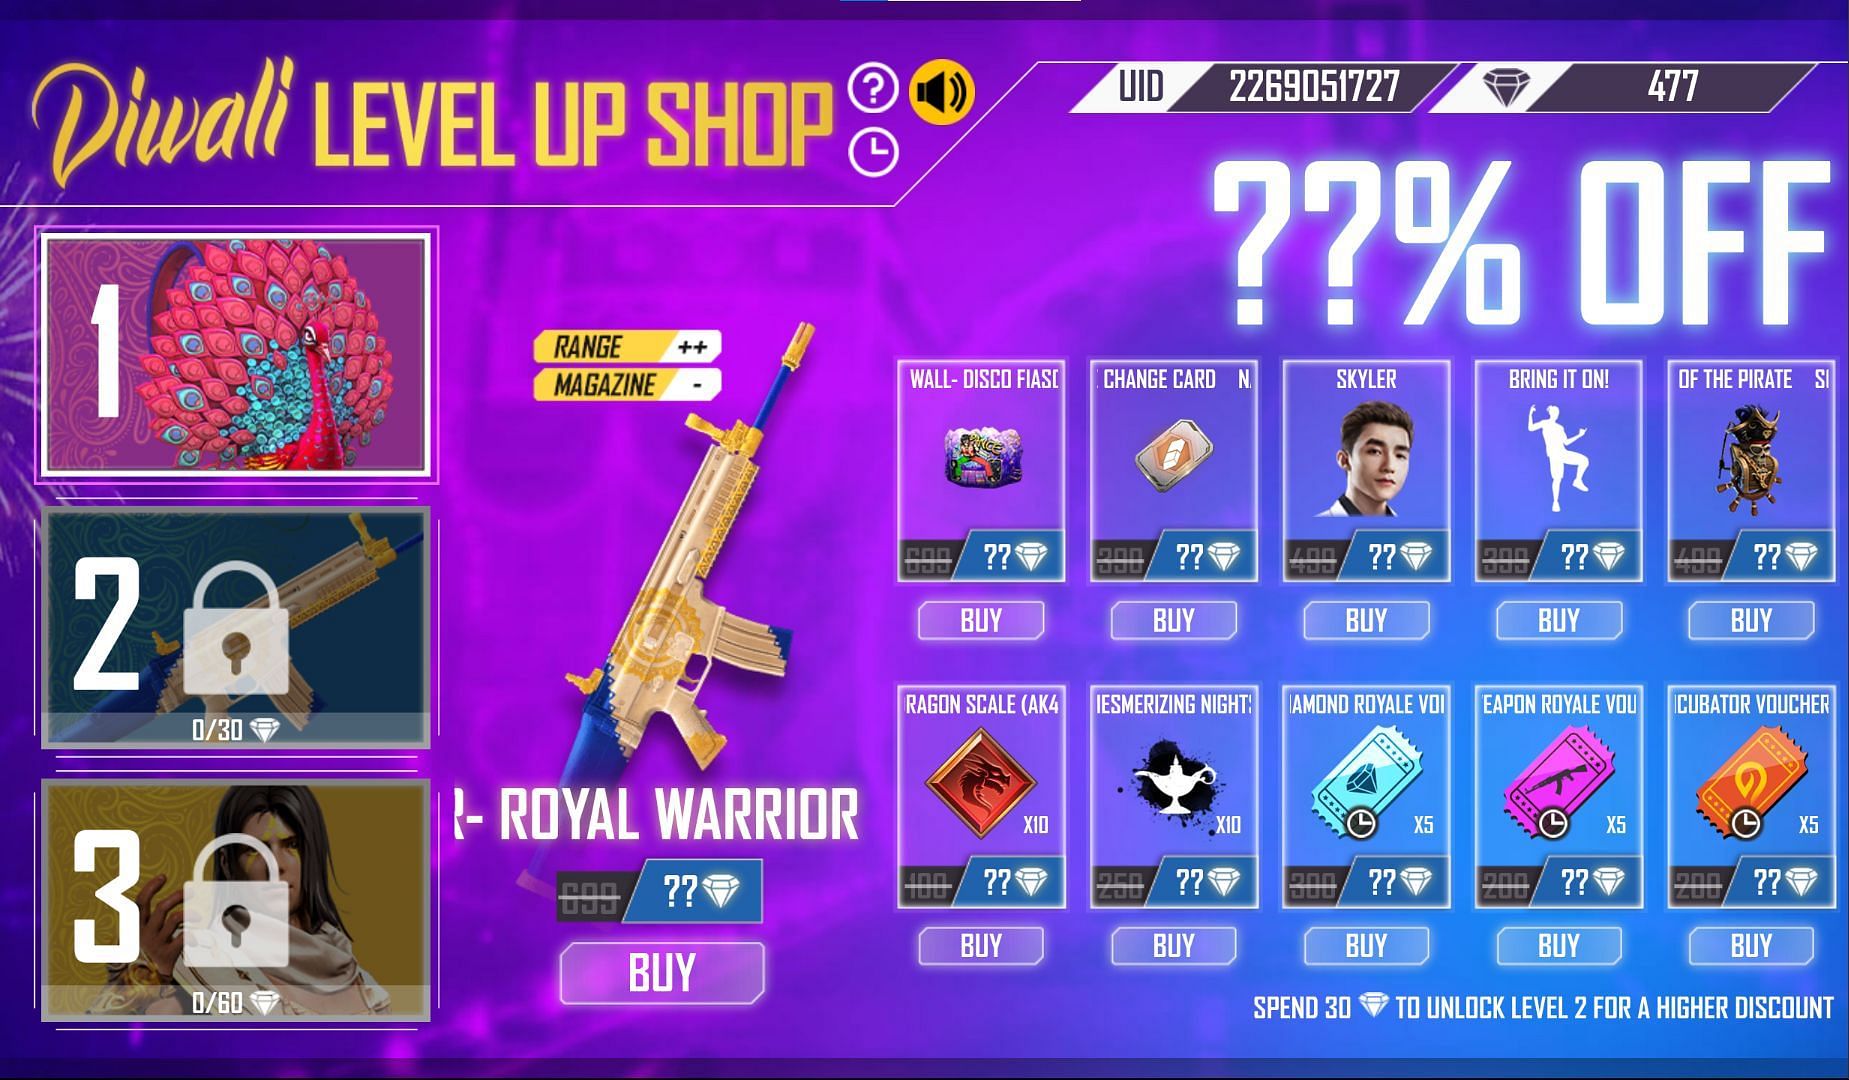 Name change cards are also available in Diwali Level Up Shop (Image via Free Fire)